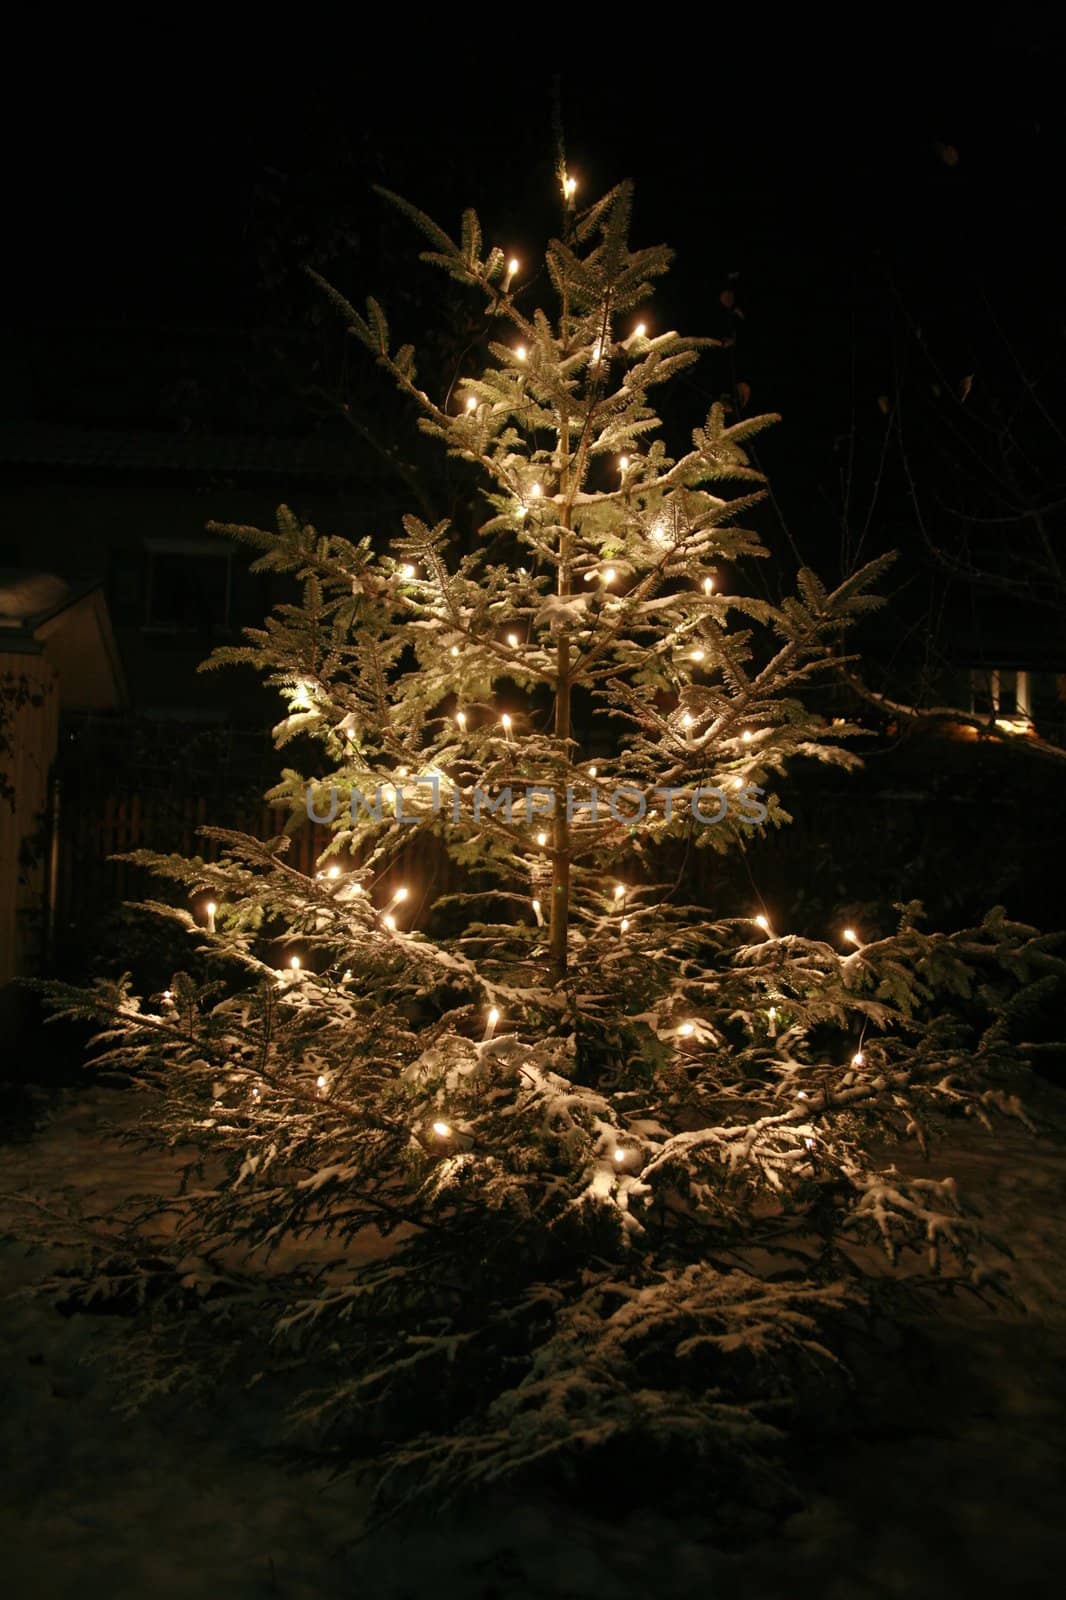 xmastree at night with snow and electric candles, very shallow DOF!............